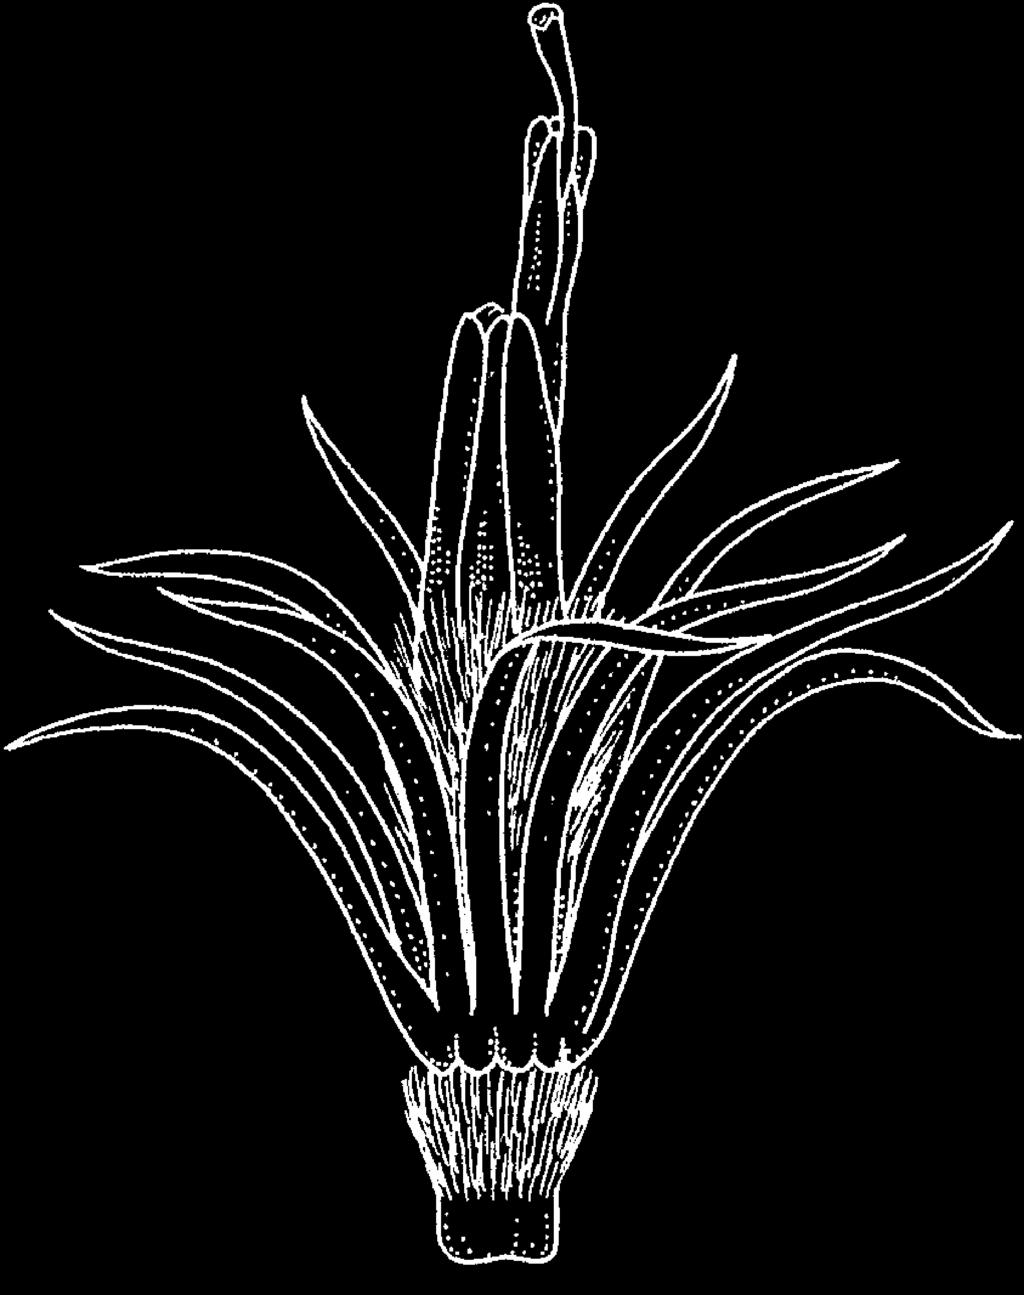 Corymbiform secondary inflorescence of radiate heads of Richterago polyphylla